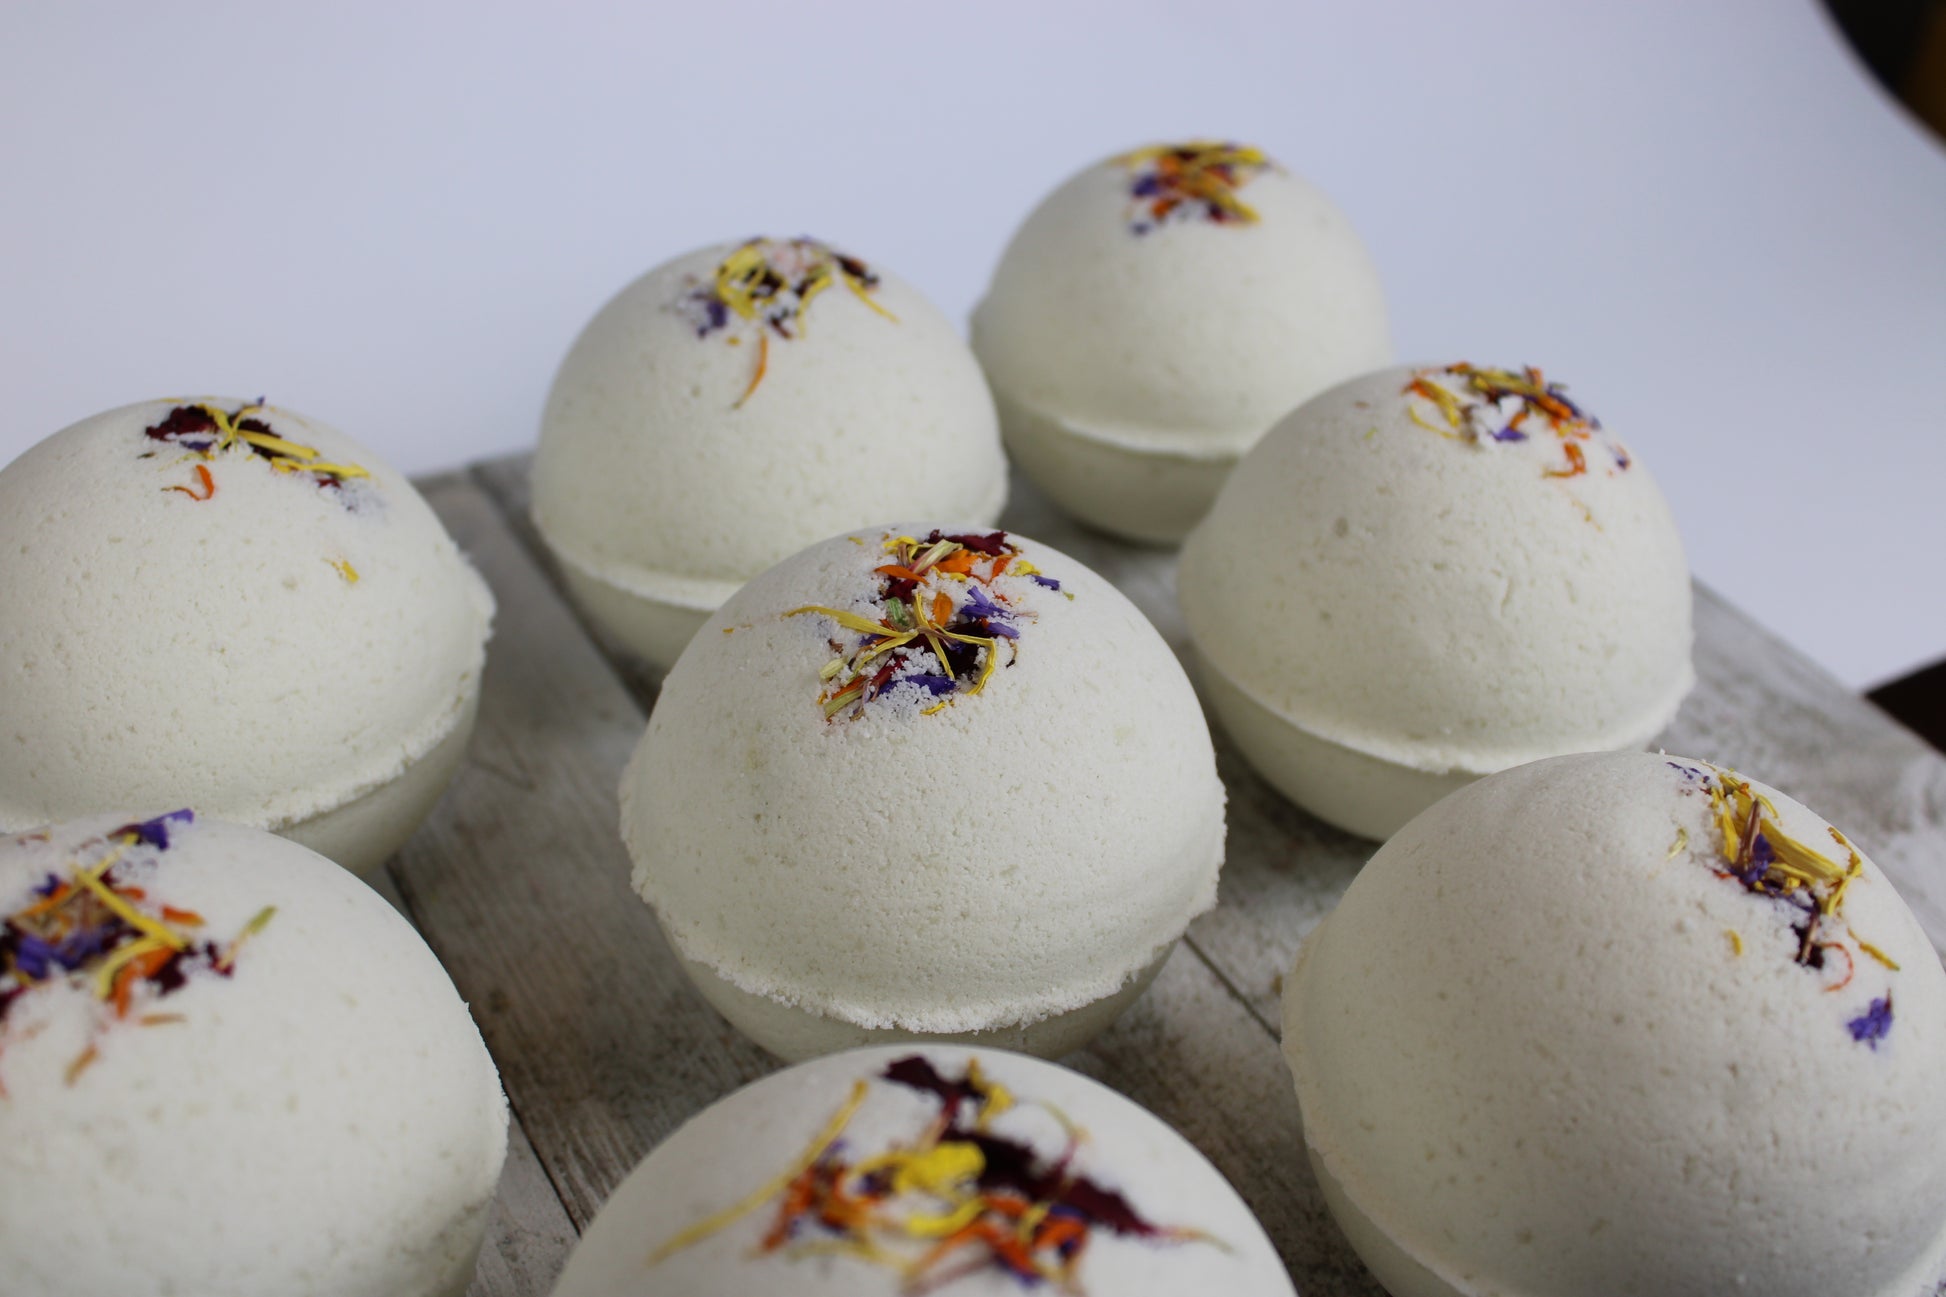 This is a bunch of the Cocoa Butter bath bombs lined up. They are white and have multiple colored botanicals